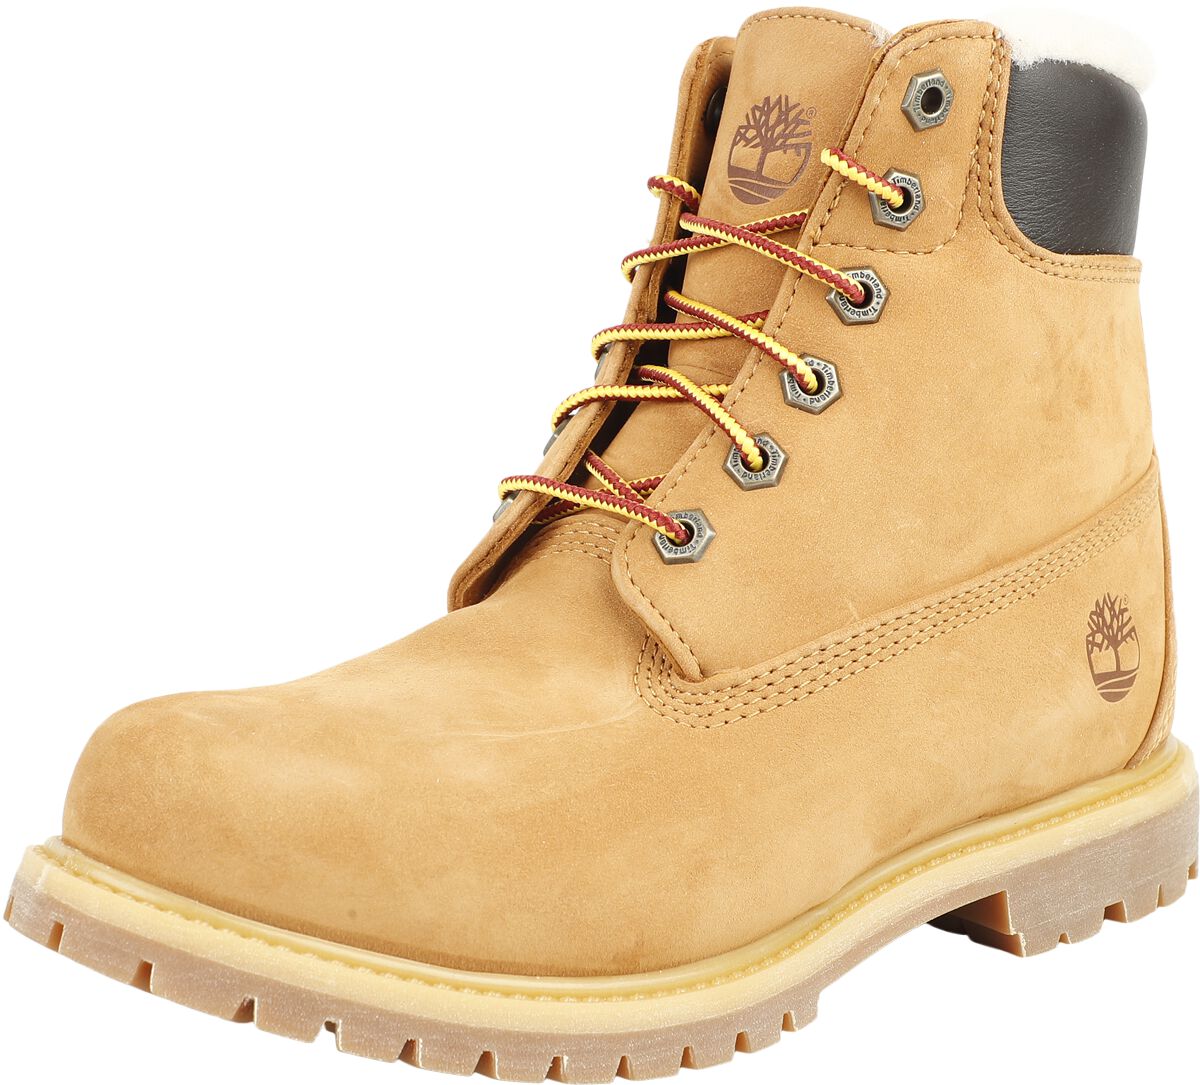 Timberland 6 Inch Premium Shearling Lined WP Boot Boot braun in EU37 von Timberland